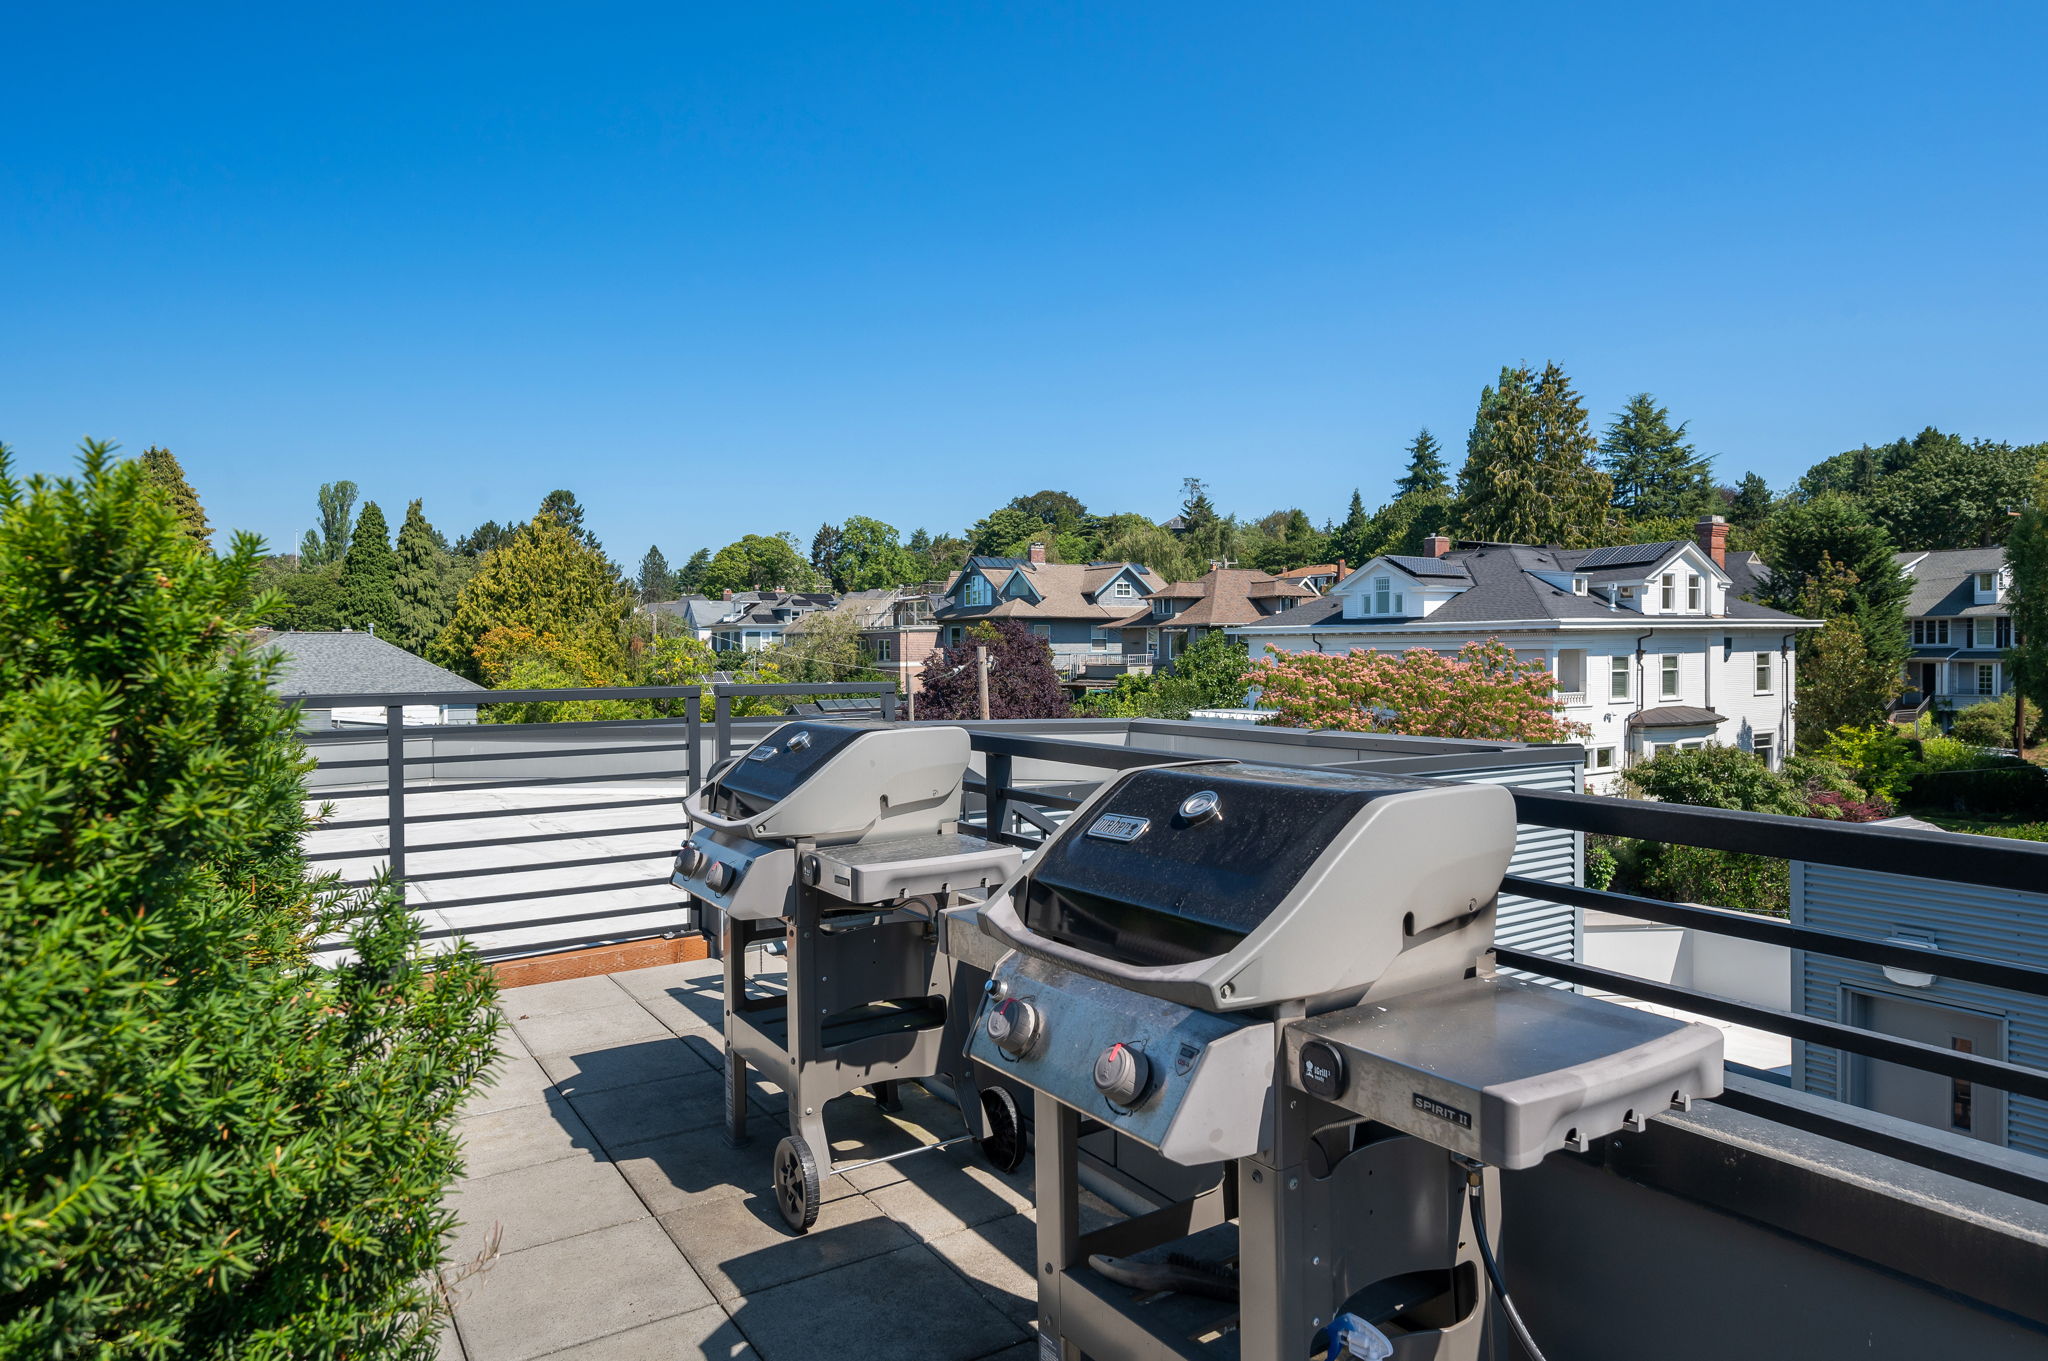 Convenient BBQ grills on the roof top patio